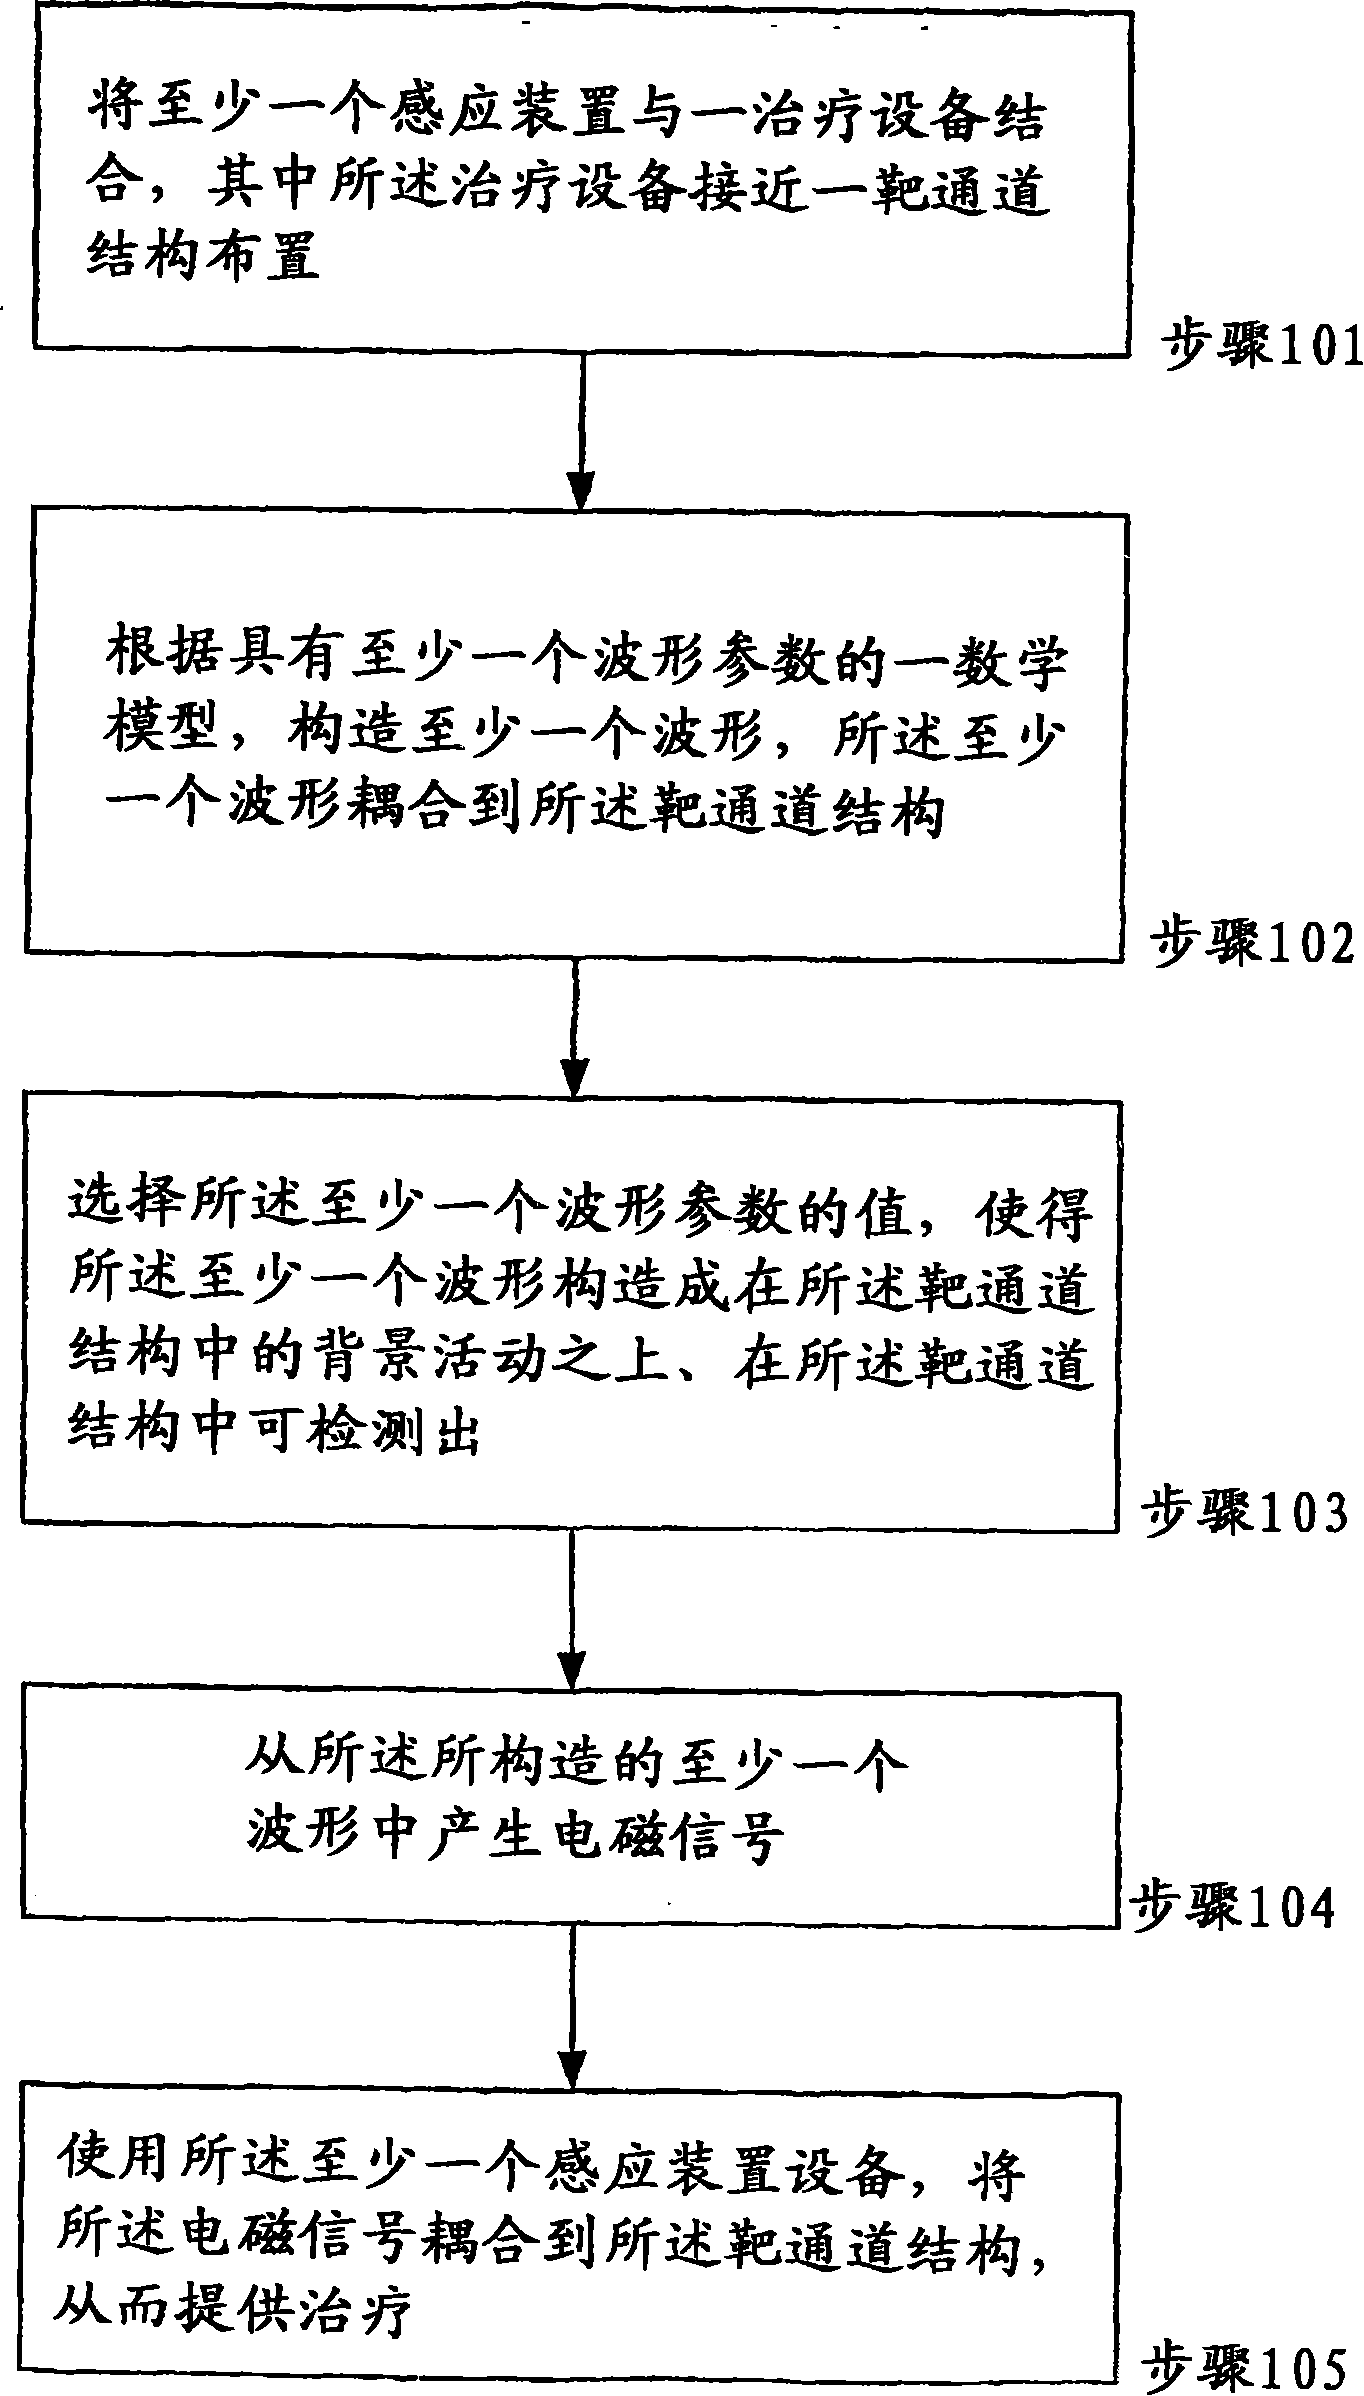 Electromagnetic treatment induction apparatus and method for using same